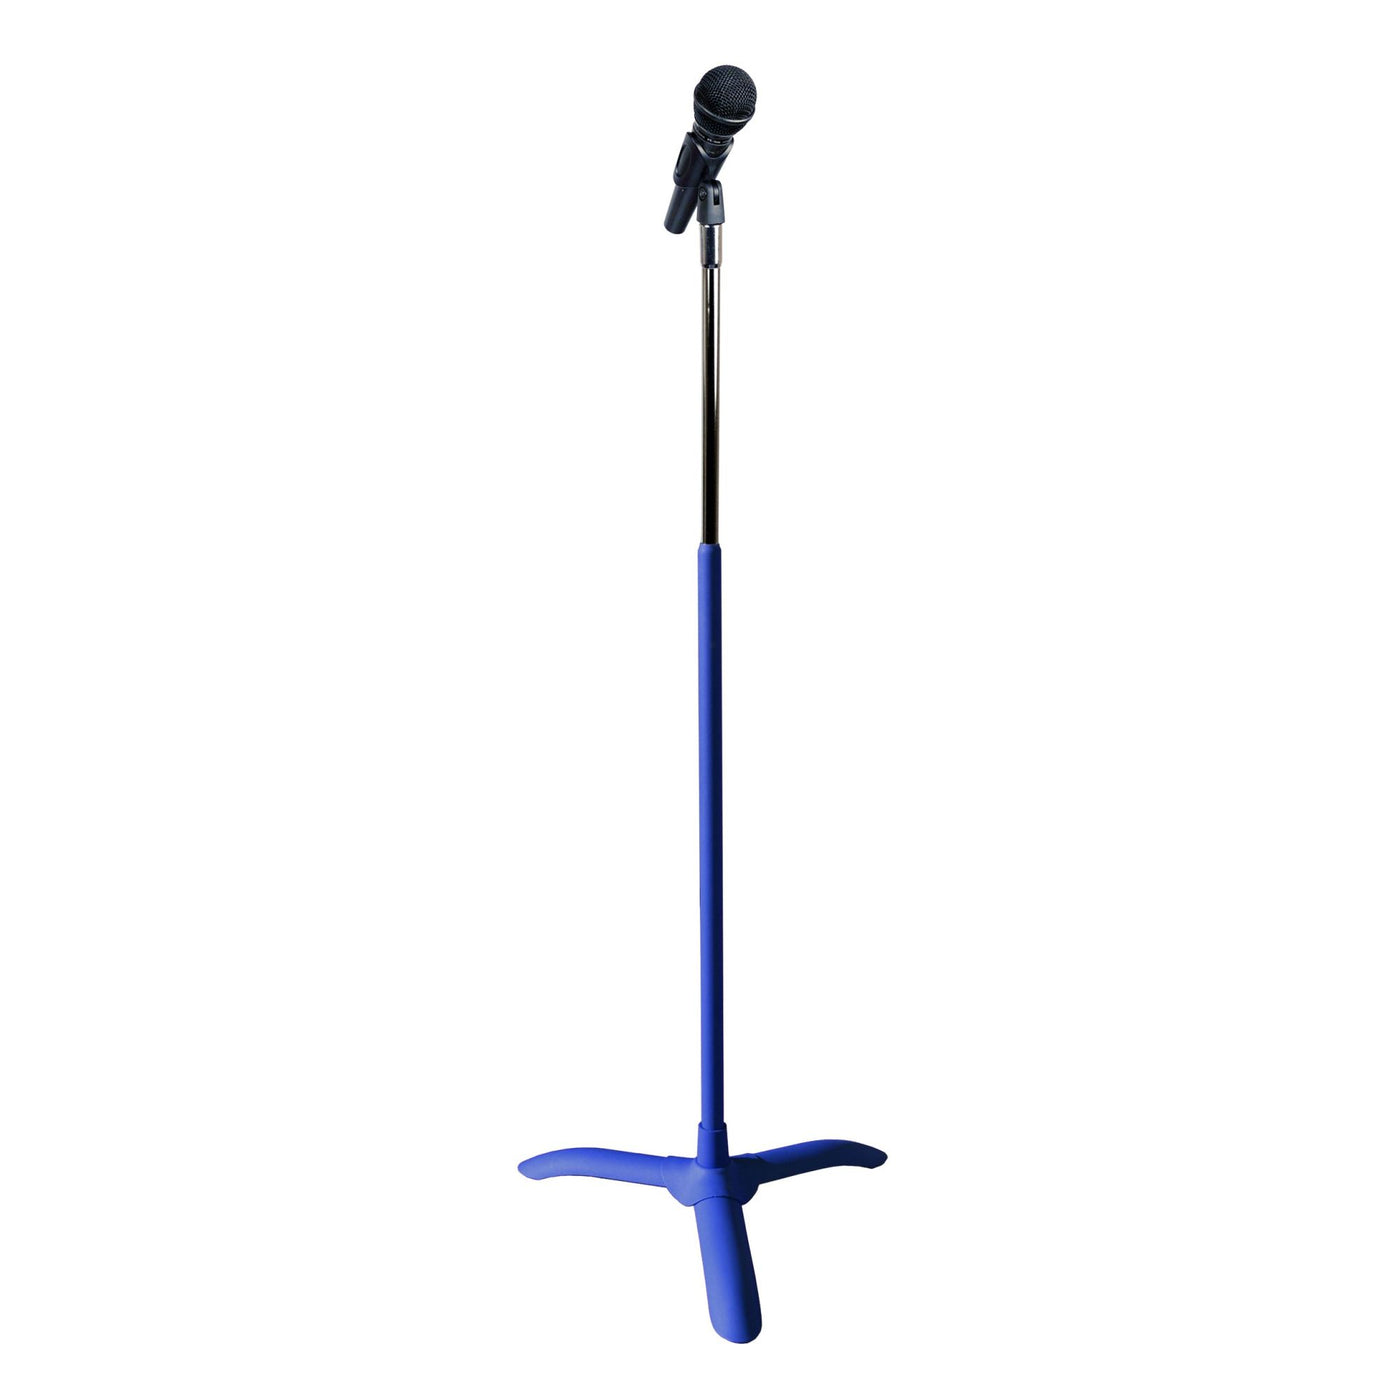 Manhasset Adjustable Height Universal Chorale Microphone Stand, Textured Blue (3016MBL)